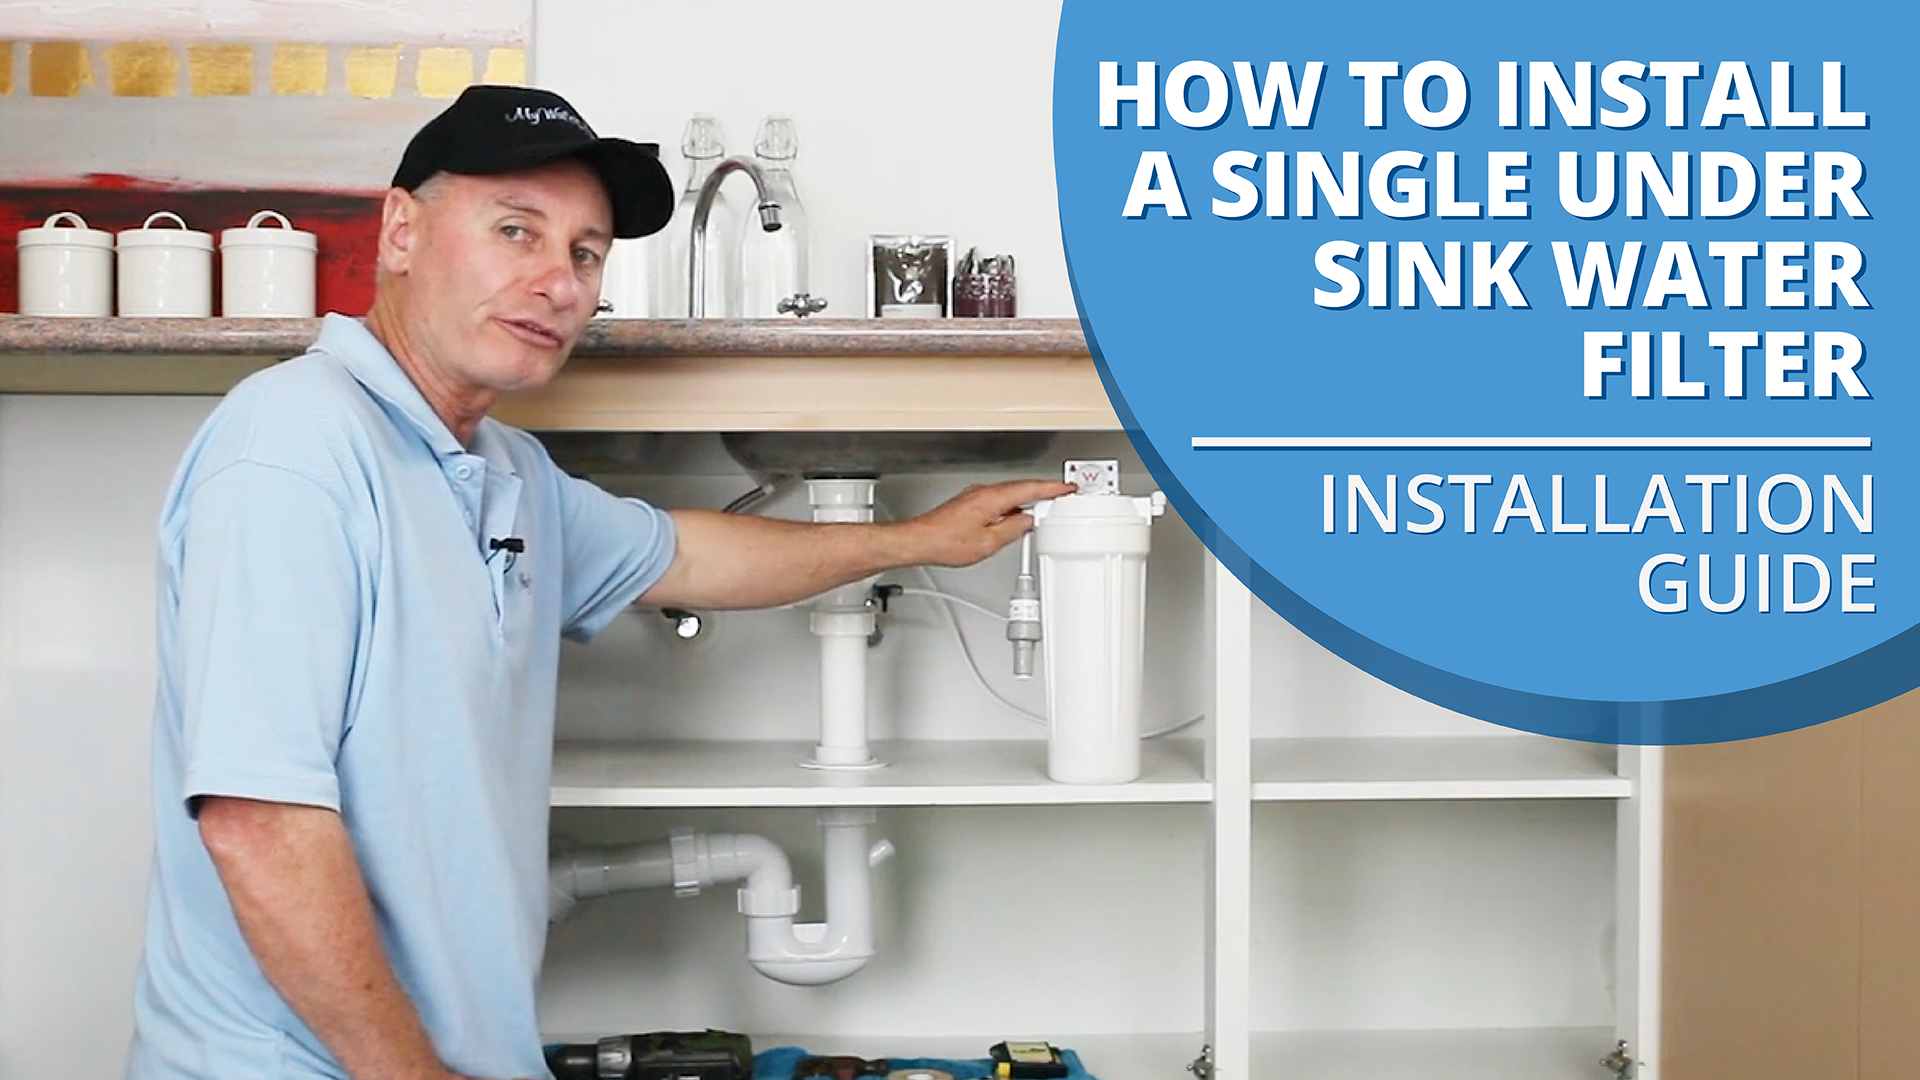 [VIDEO] How to Install a Single Under Sink Water Filter